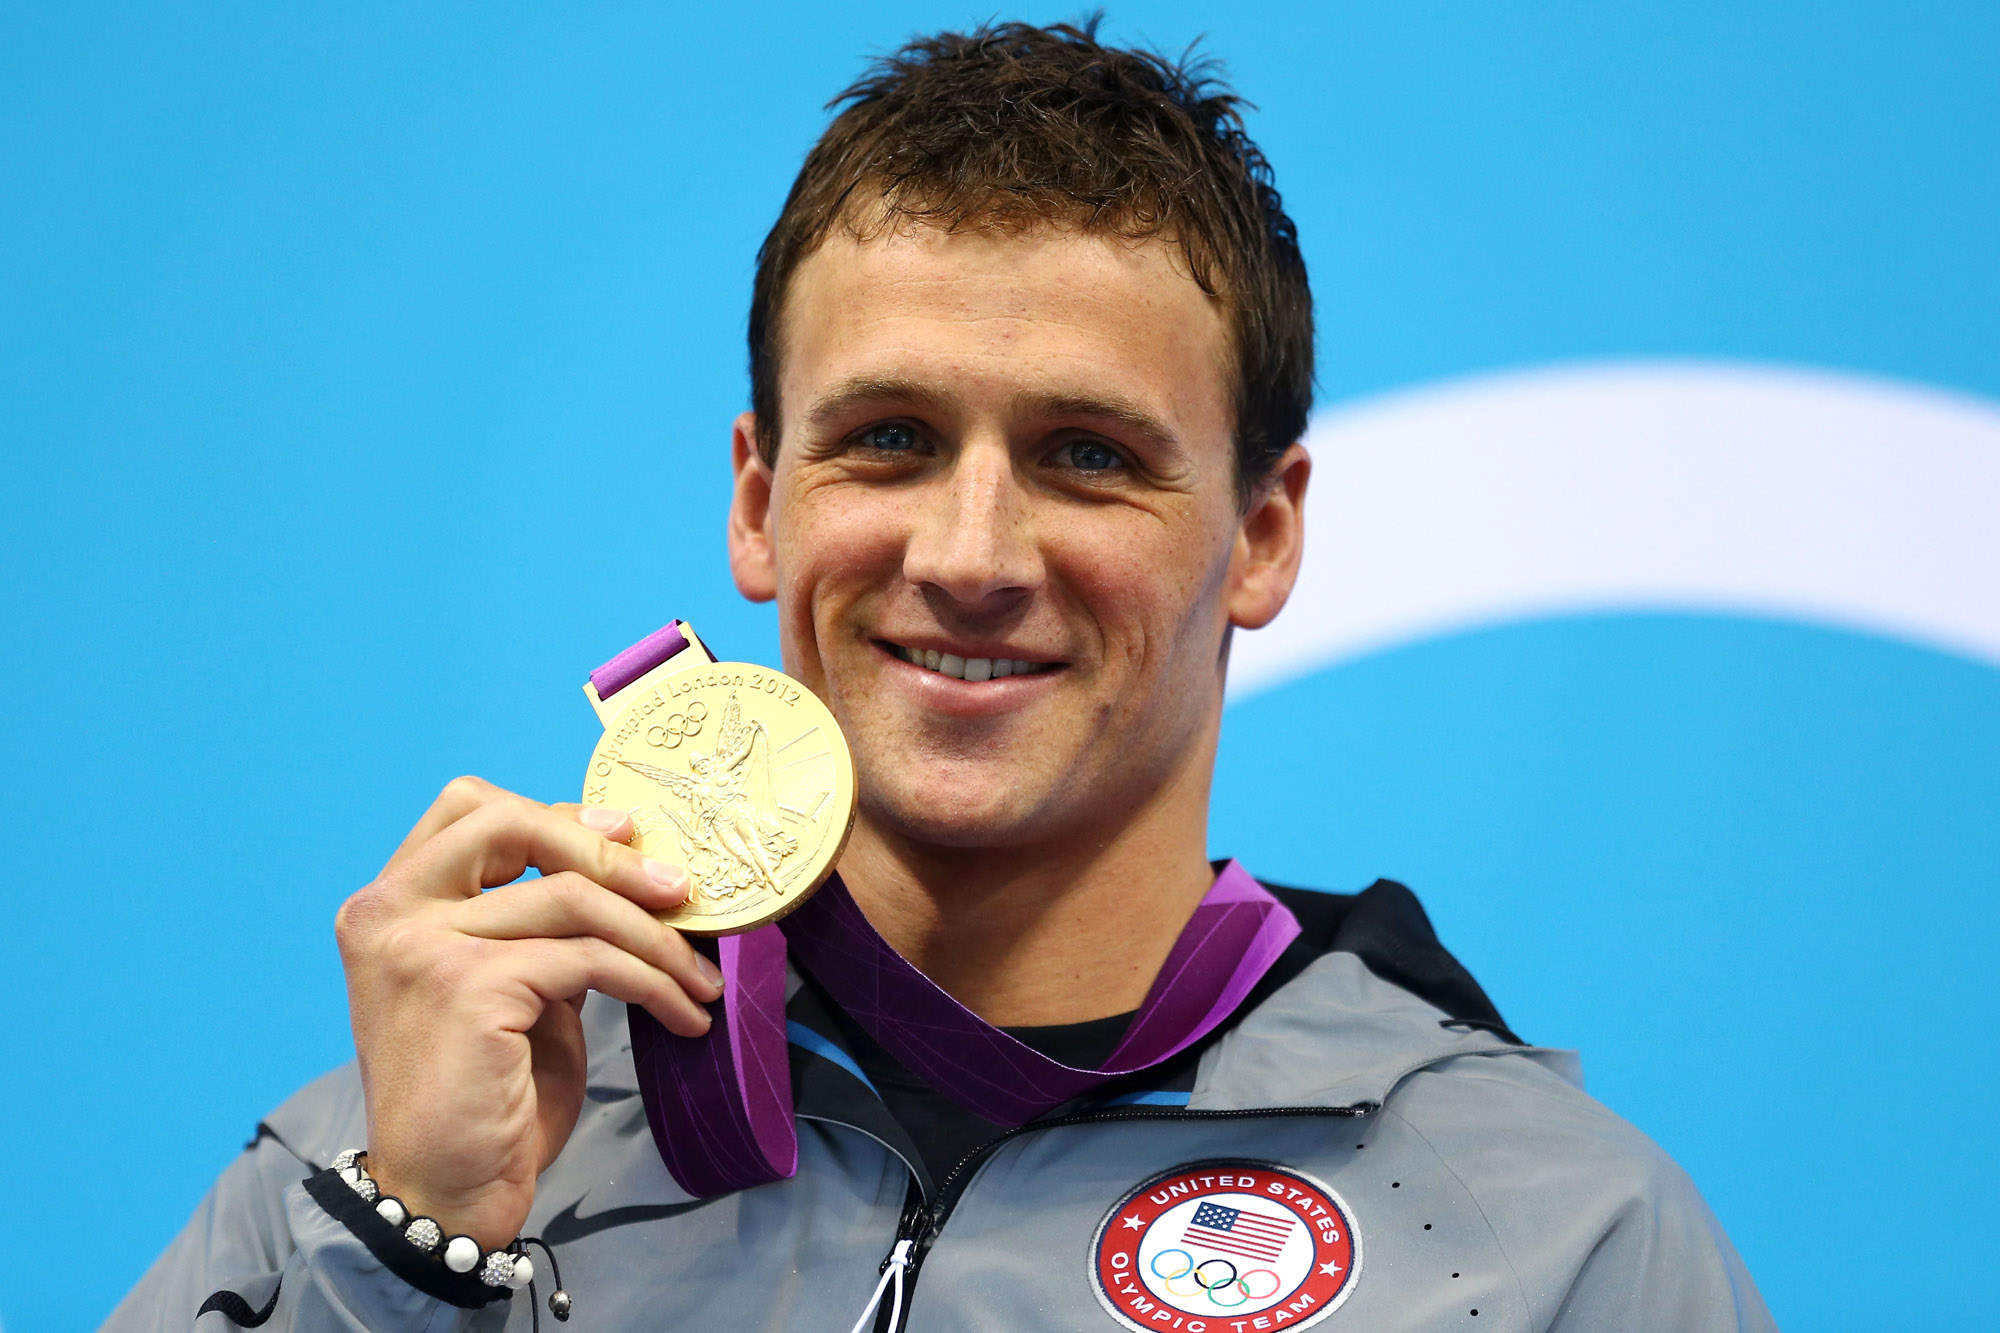 U.S. swimmer Ryan Lochte at the London 2012 Olympic Games Photo: Getty Images